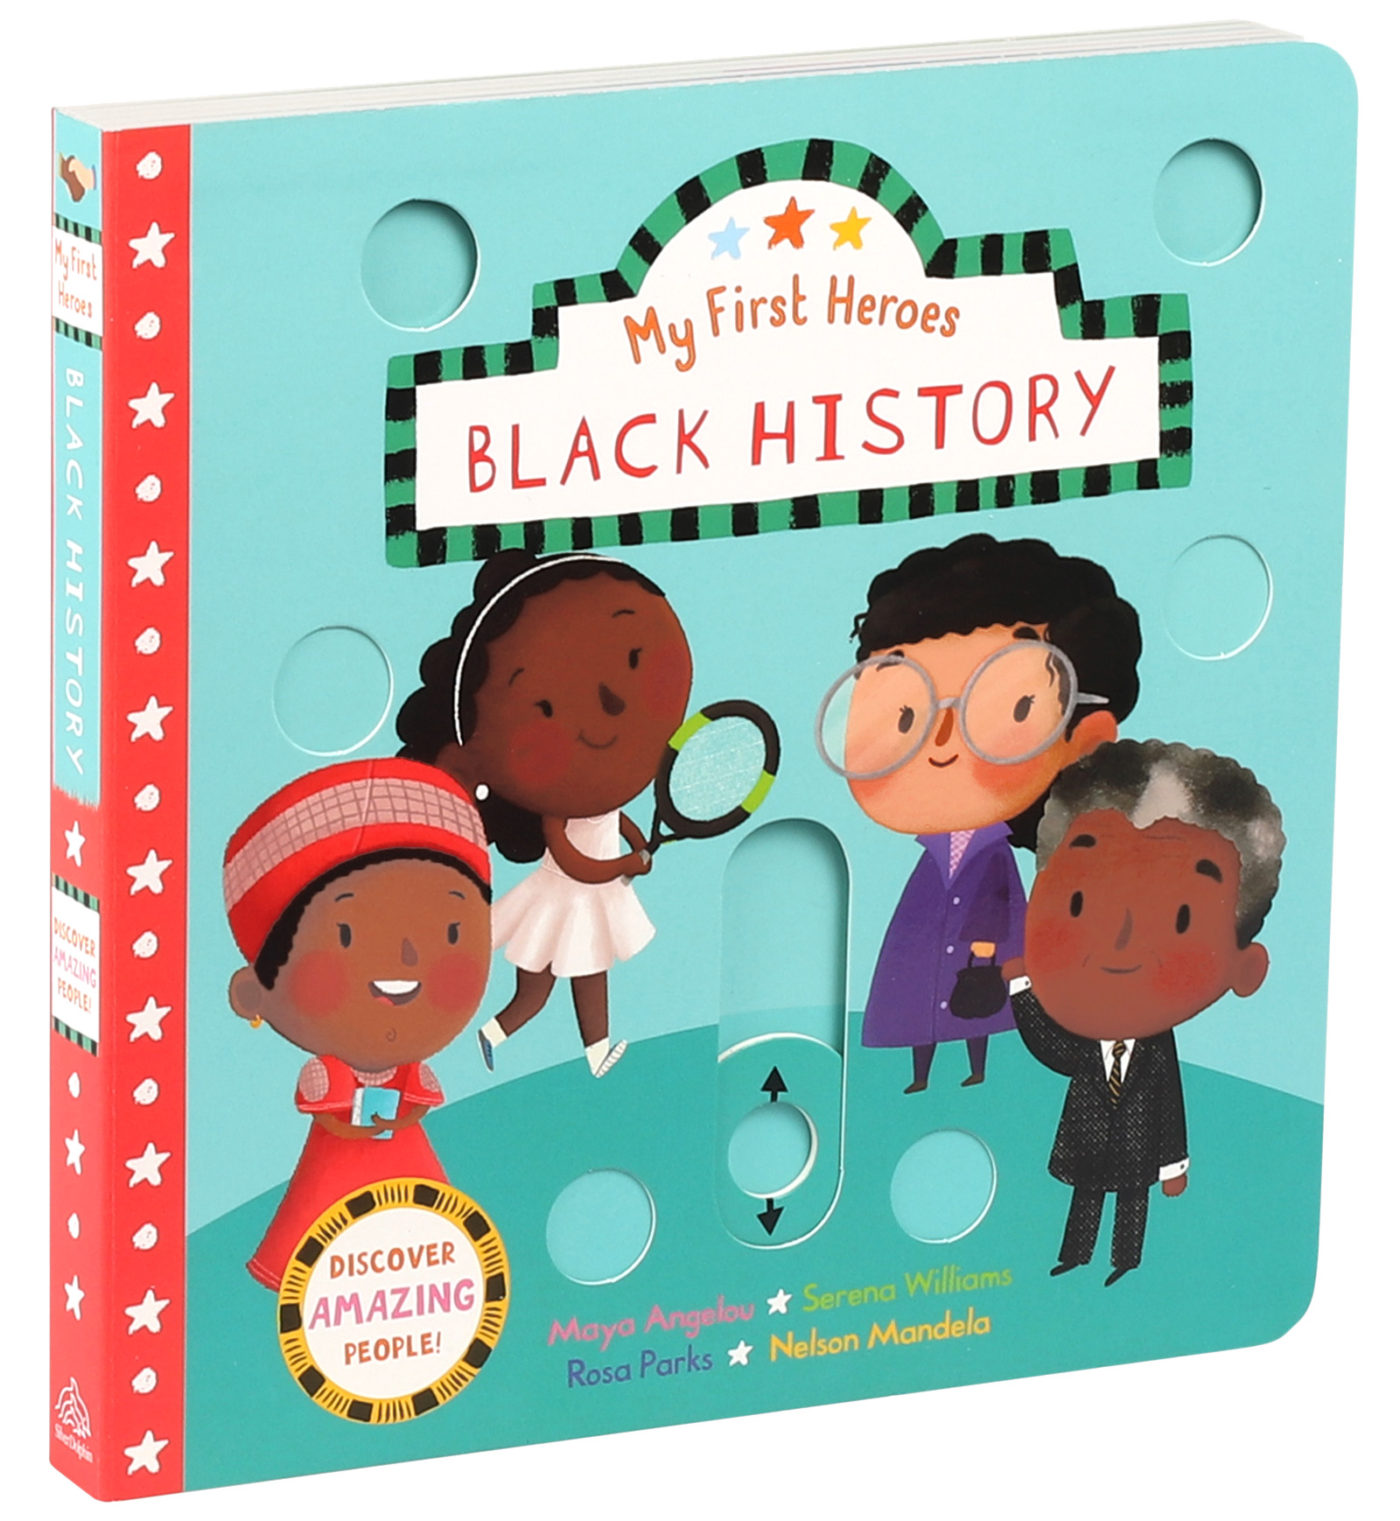 Baby & Toddler Books That Celebrate Diversity & Inclusion